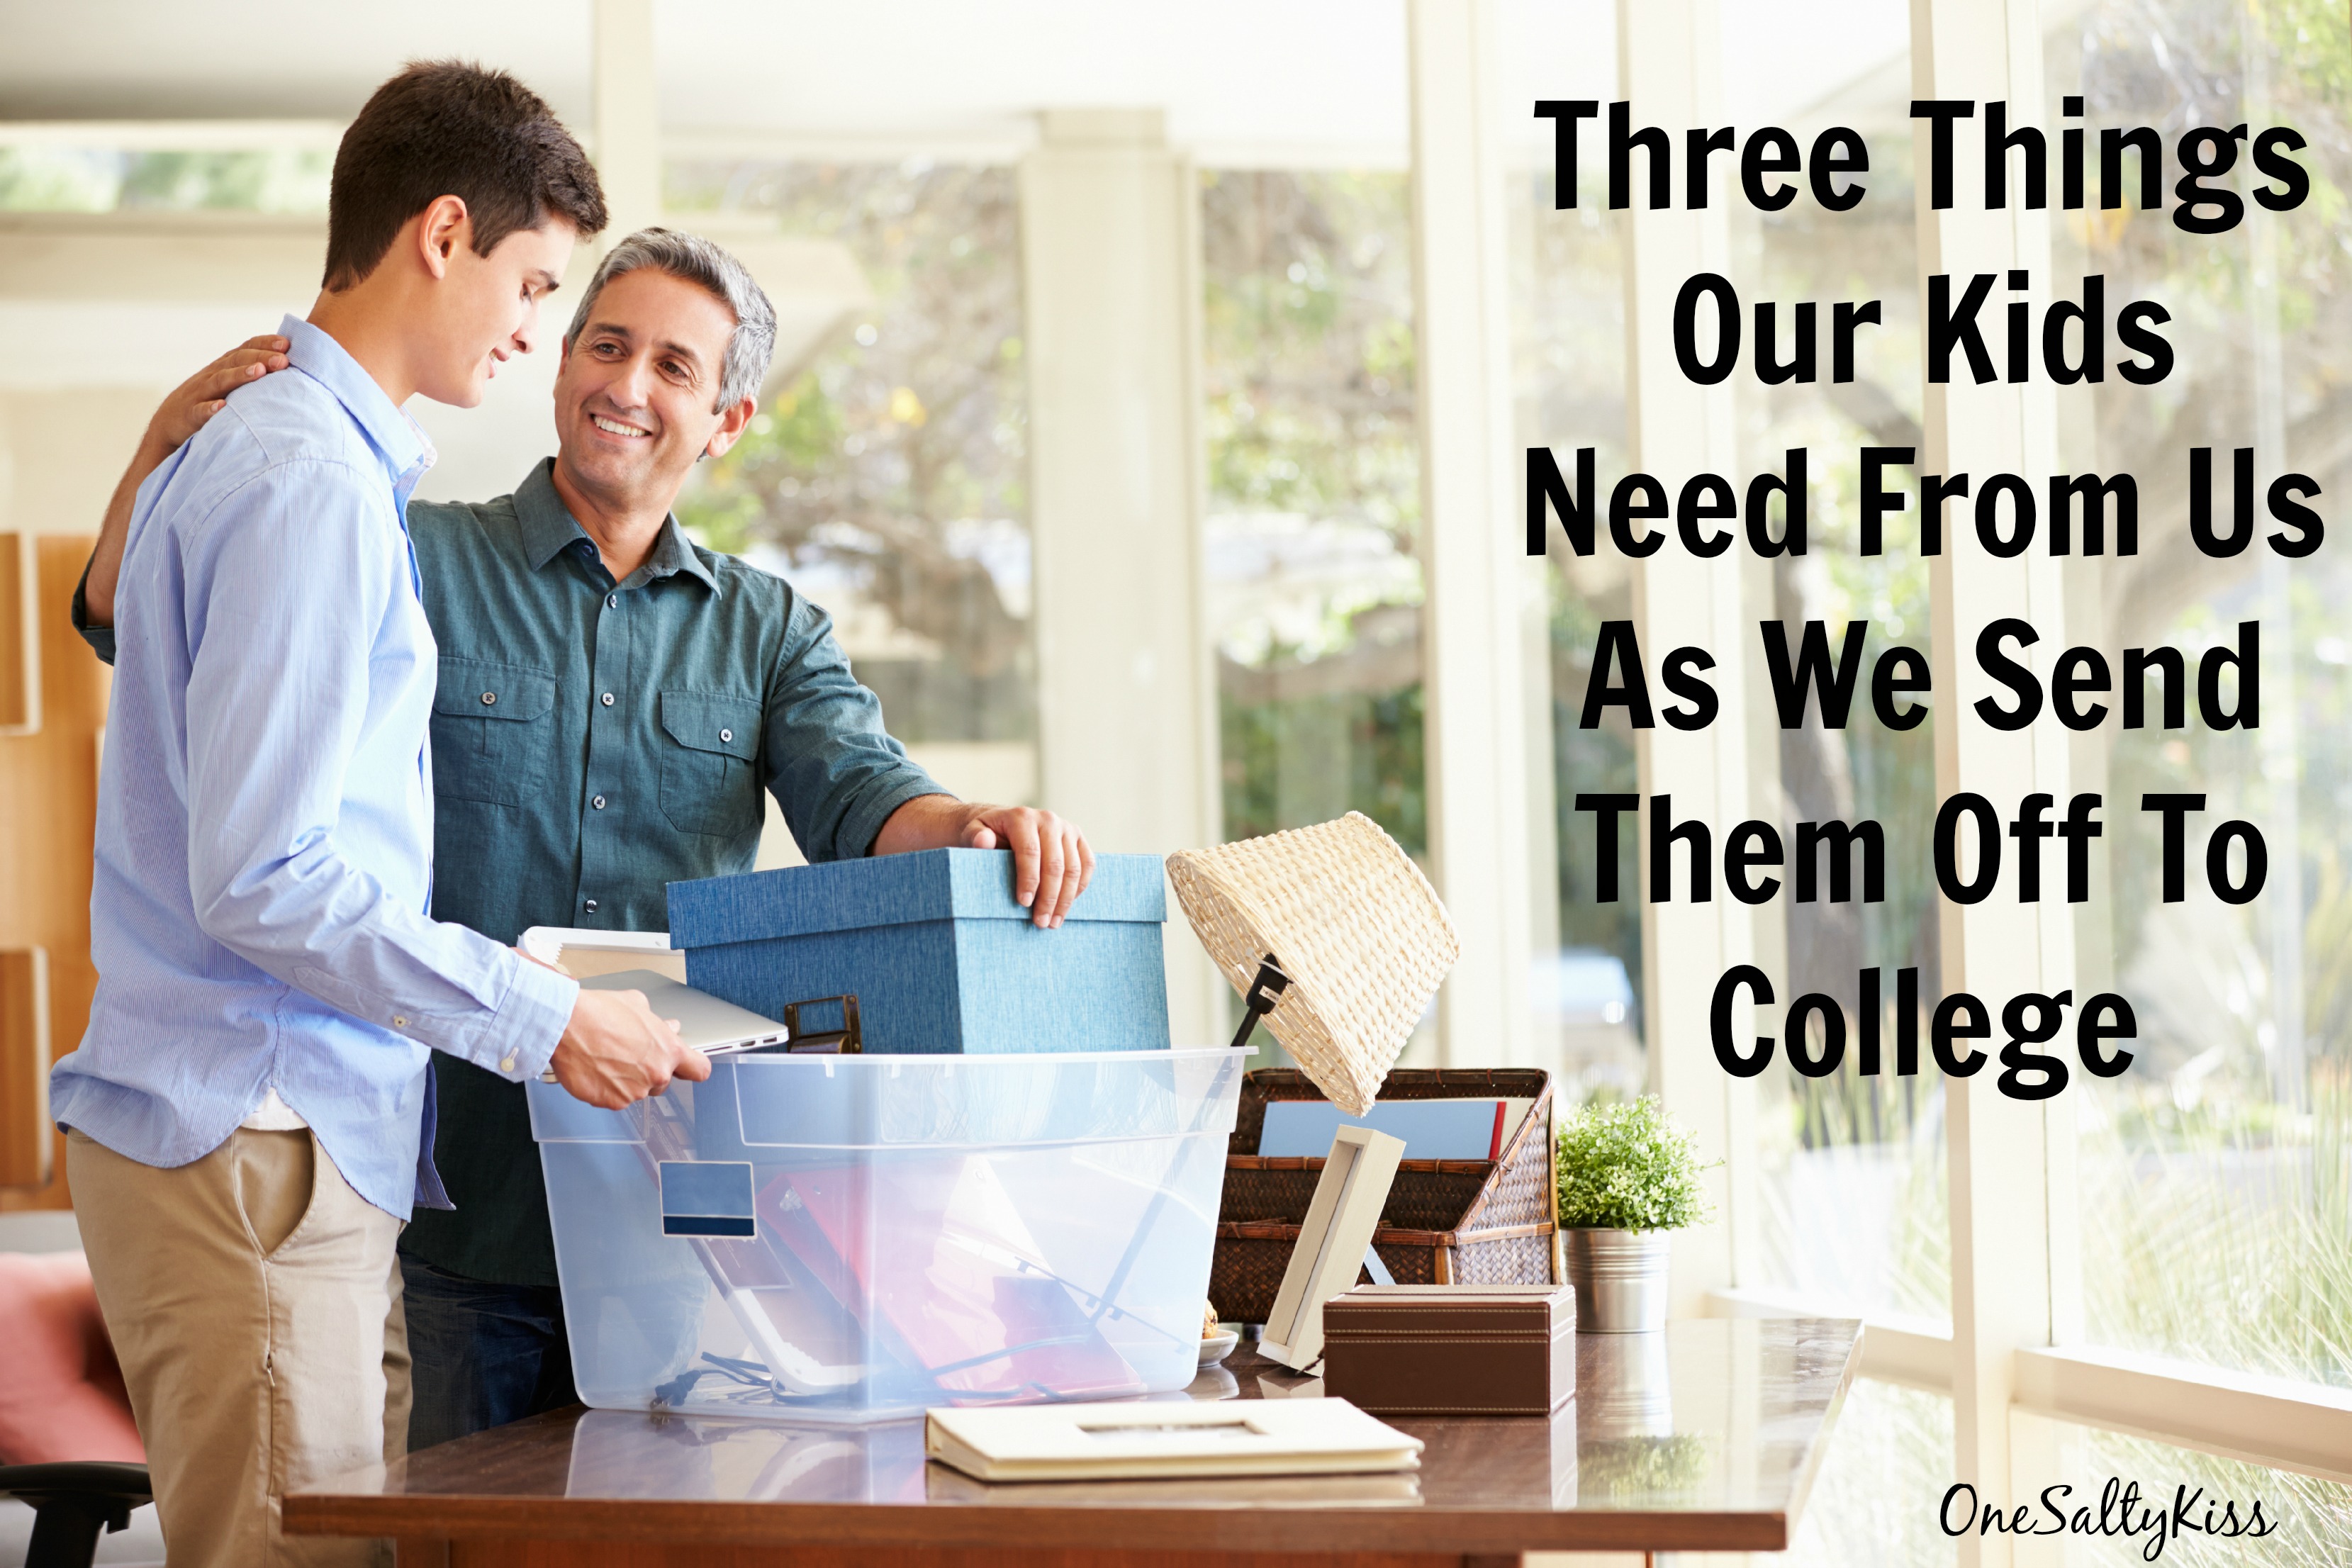 What Our Kids Need From Us As We Send Them Off To College